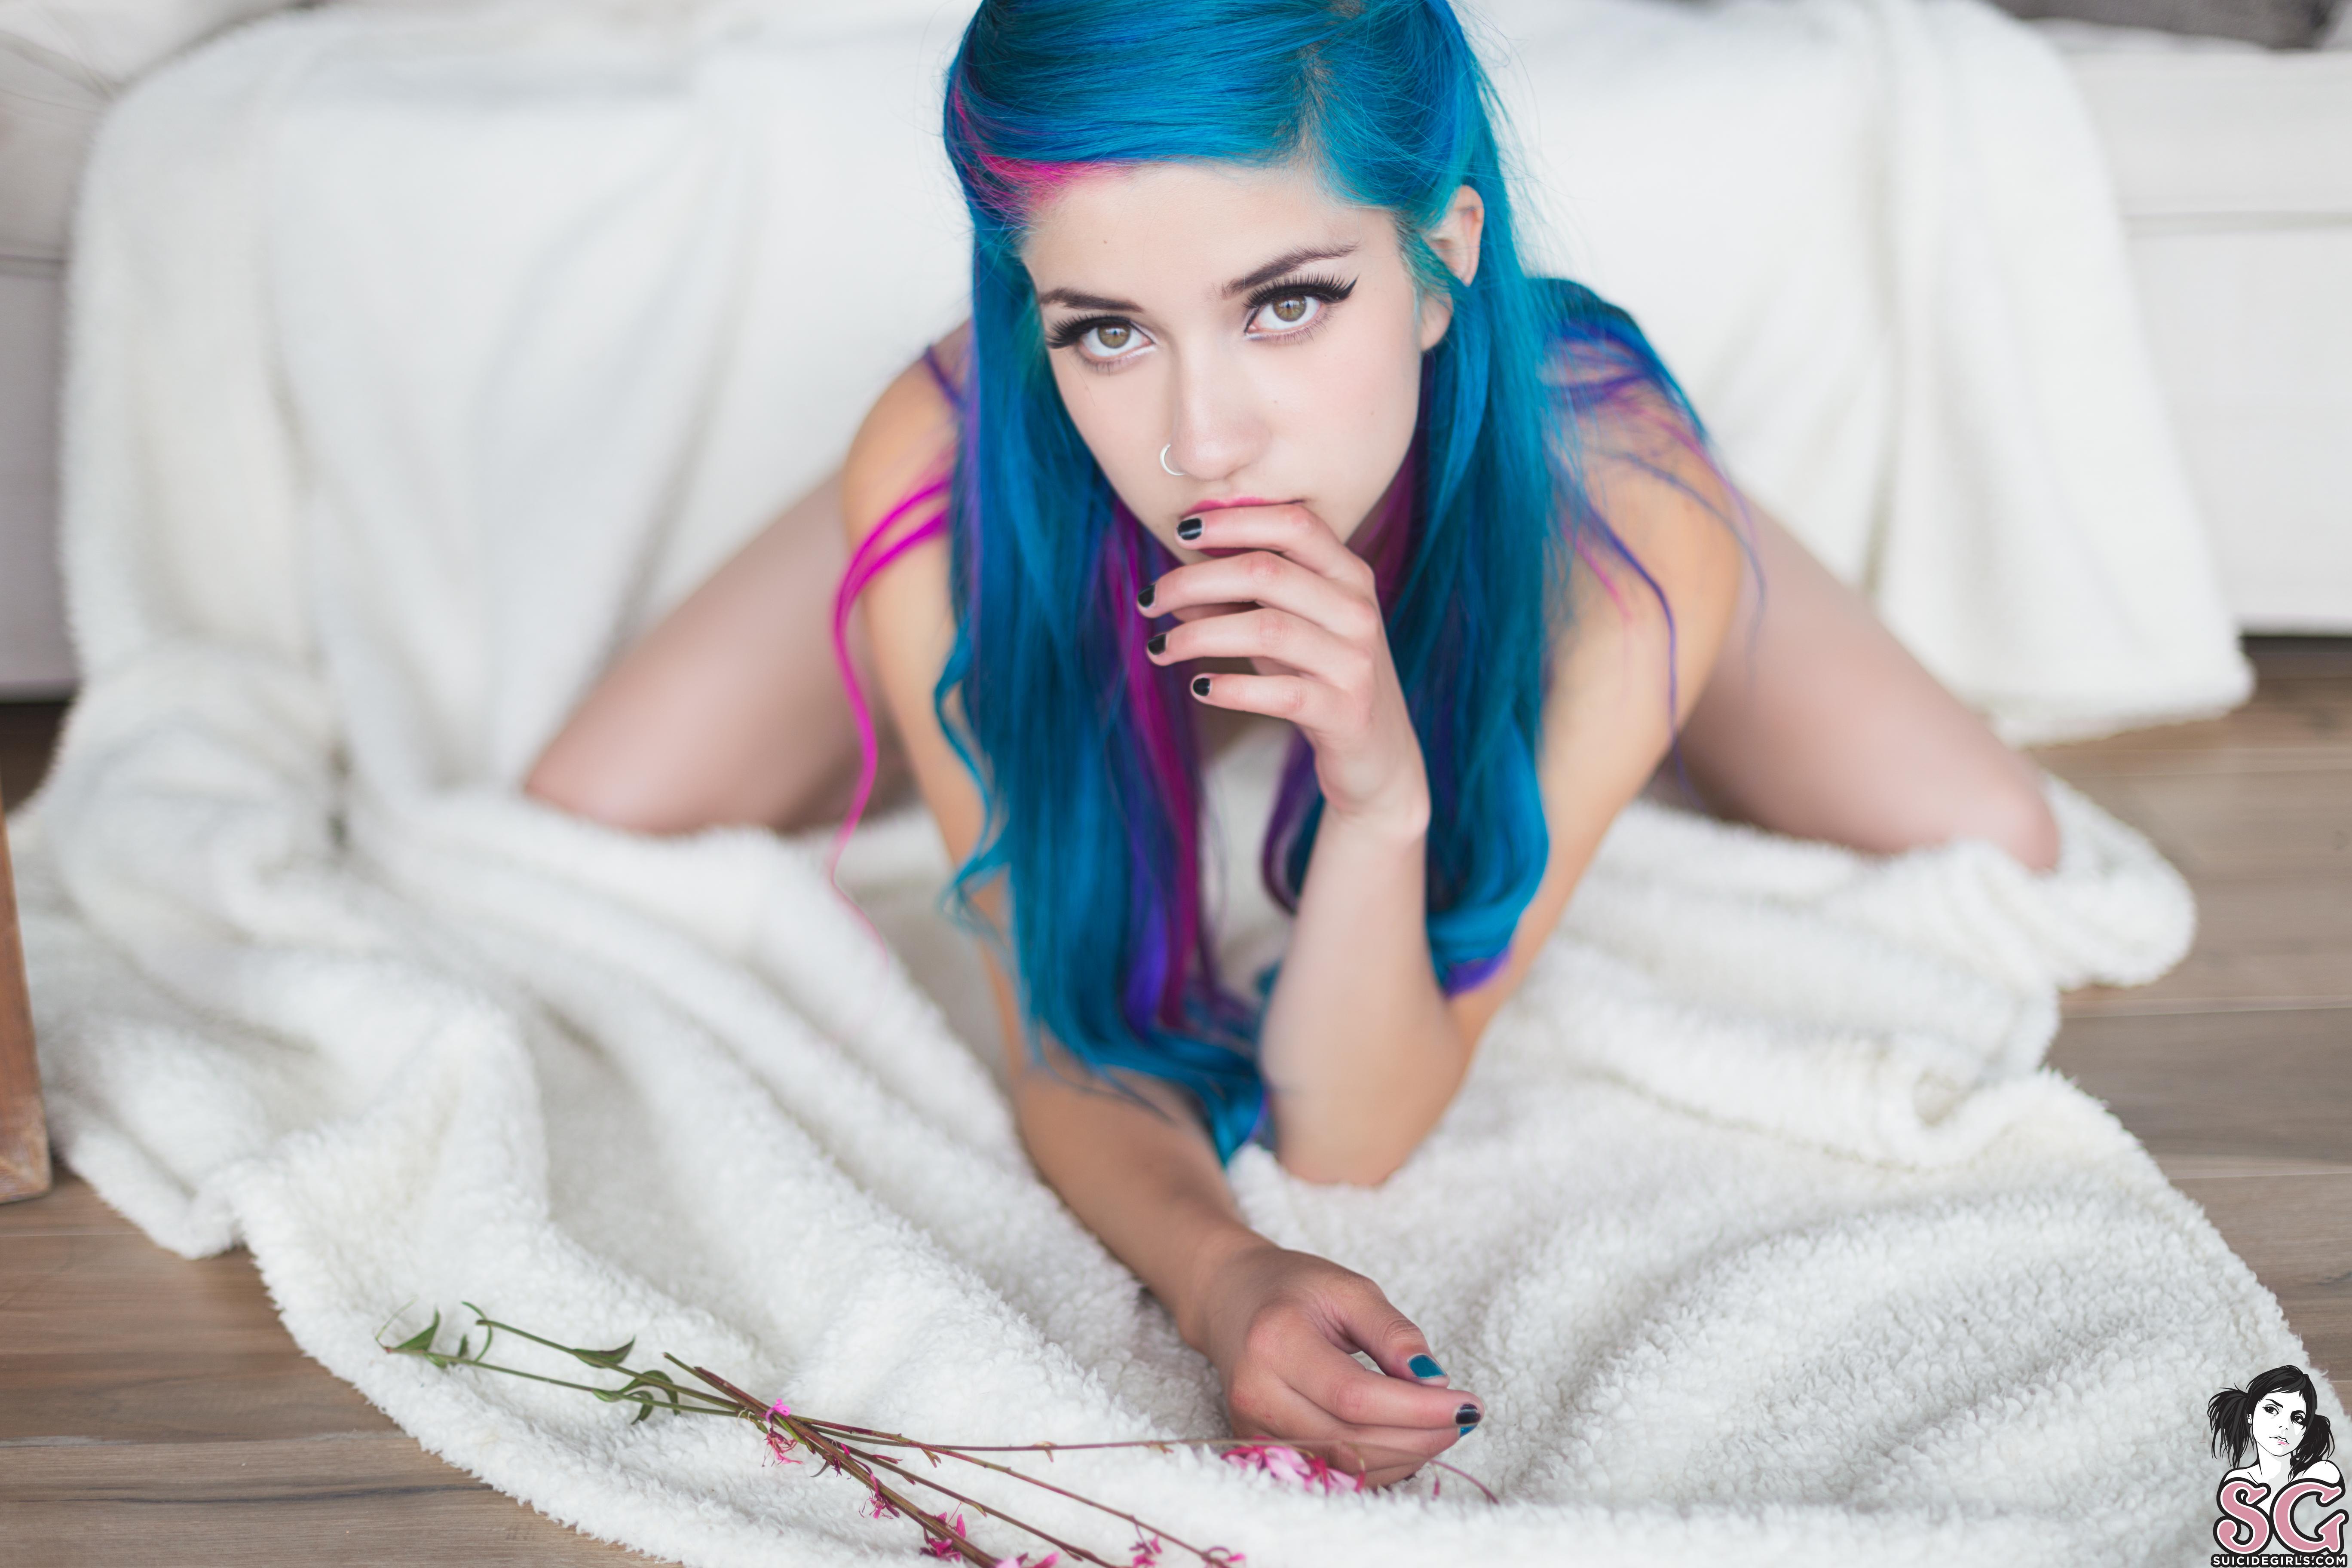 Blue hair babe pulls tape nipples compilation